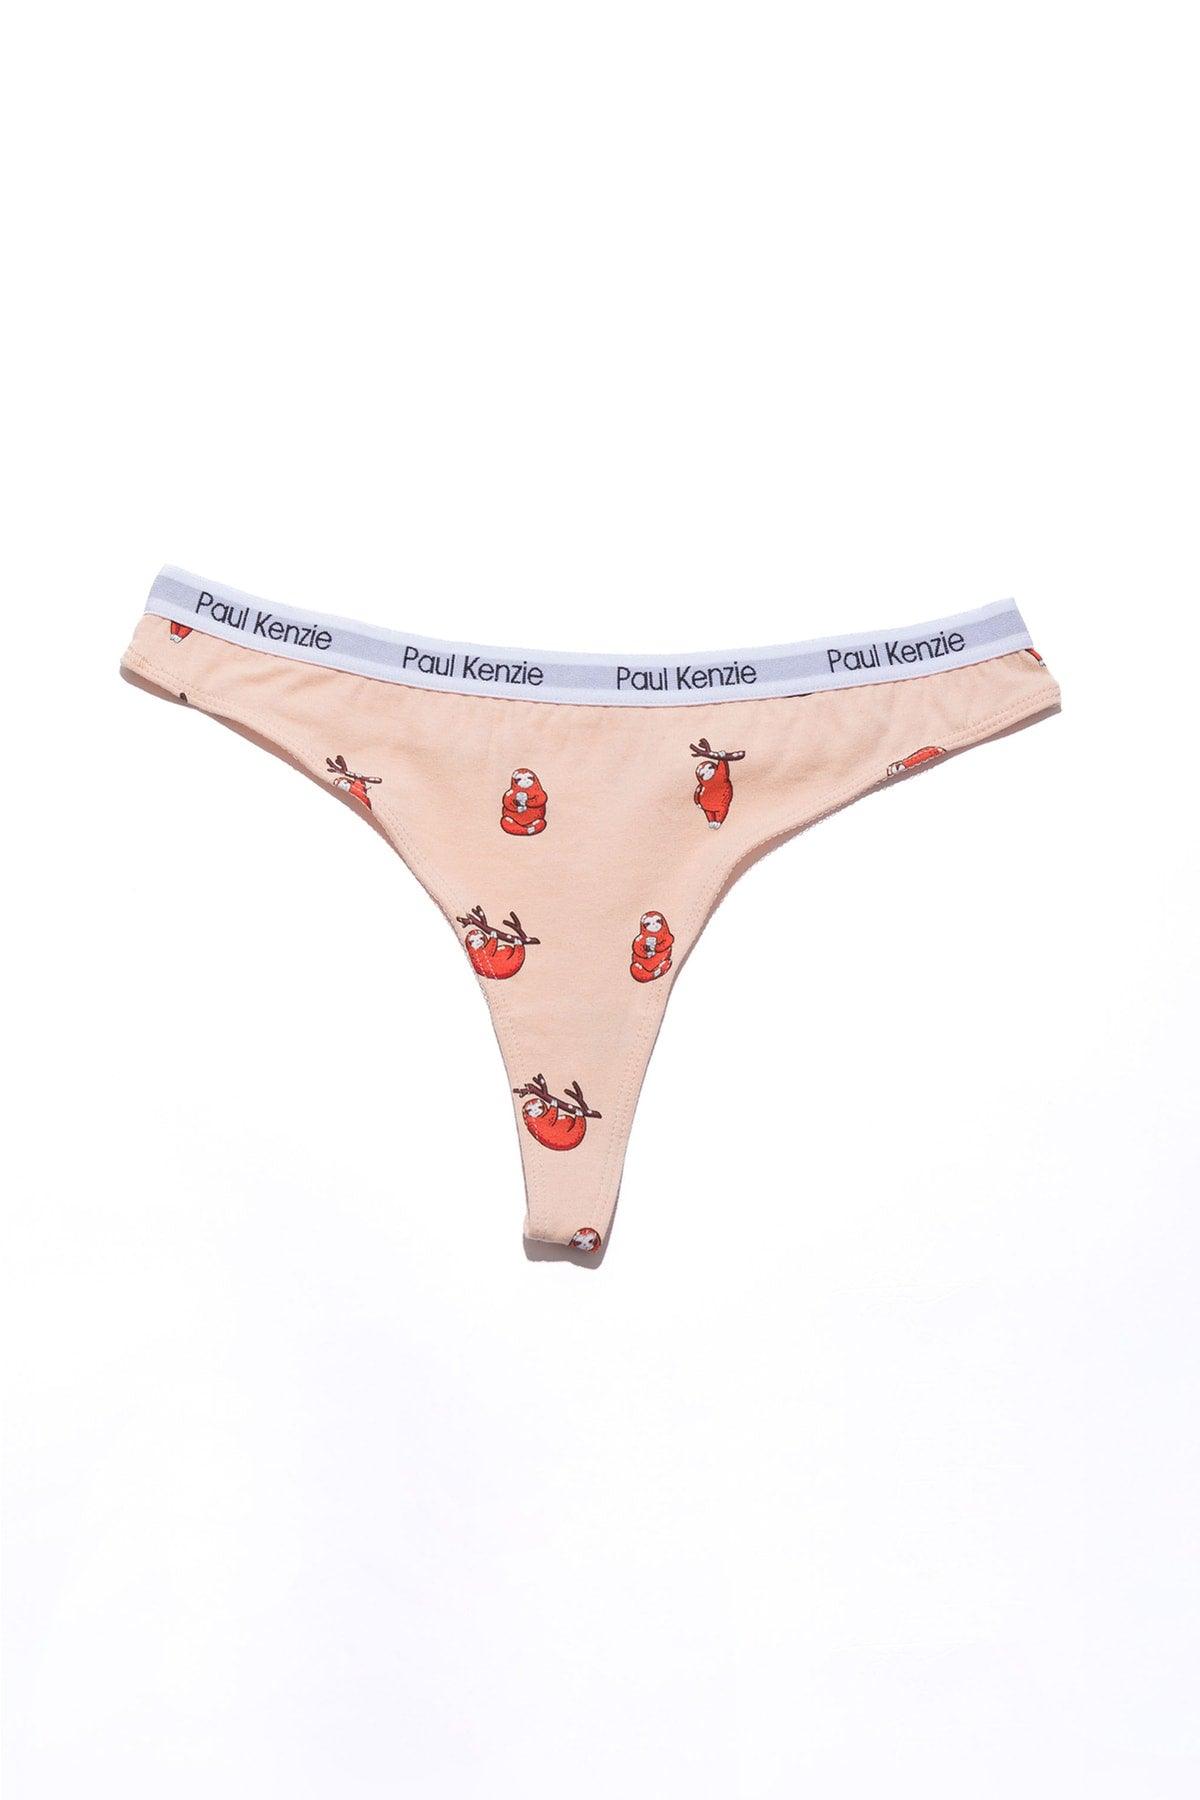 Patterned Women's String Panties - Couple Collection Lazy - Swordslife